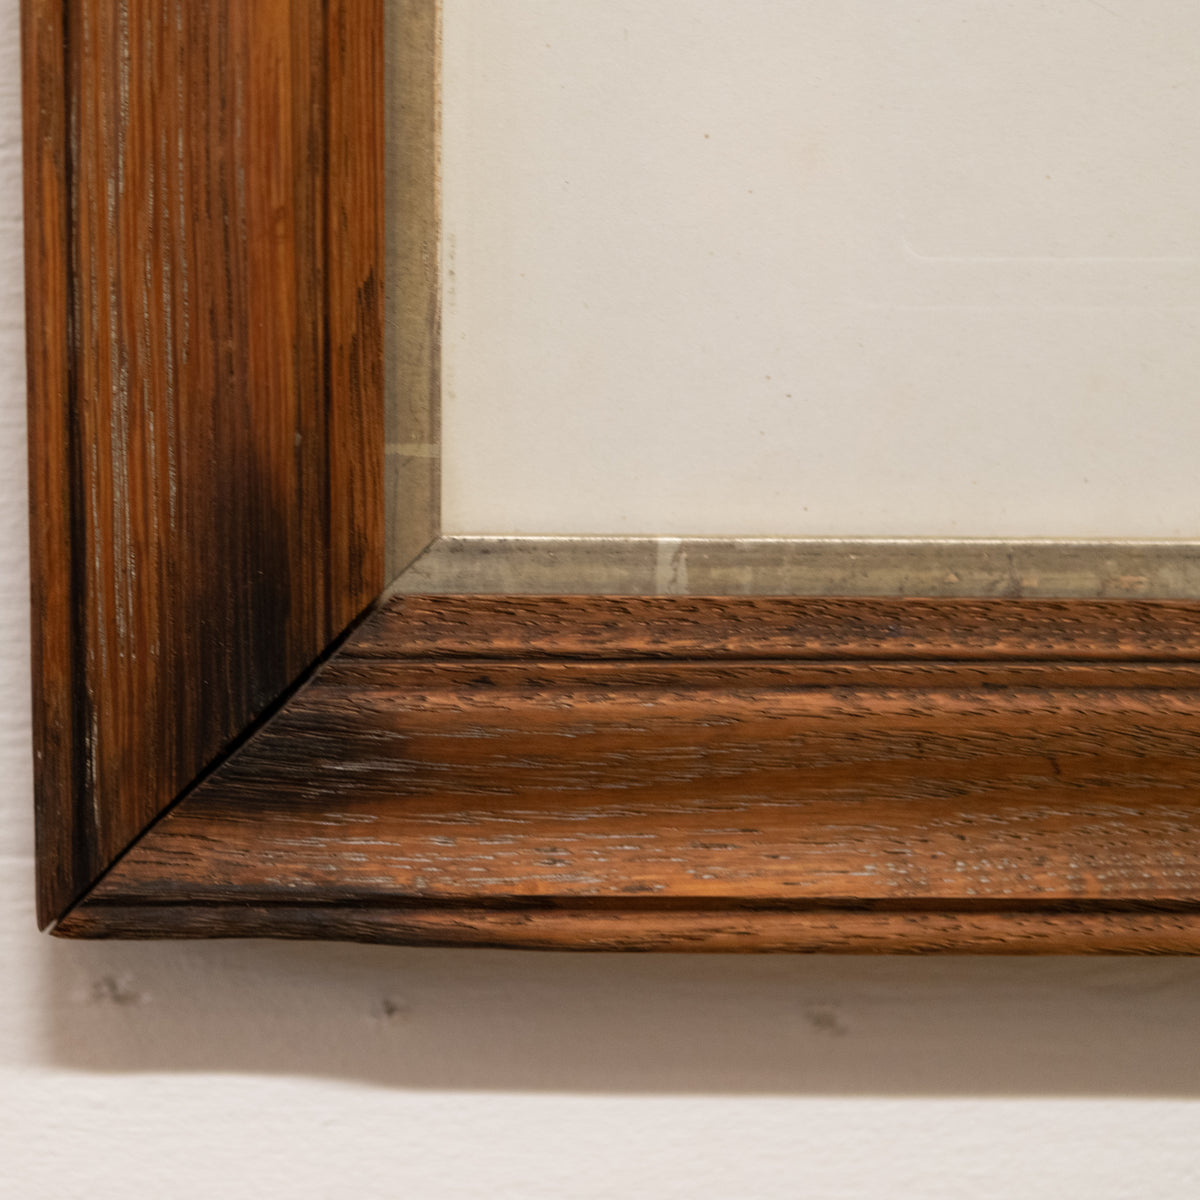 Antique Oak Framed George Sheridan Knowles Print Birthday Honours | The Architectural Forum